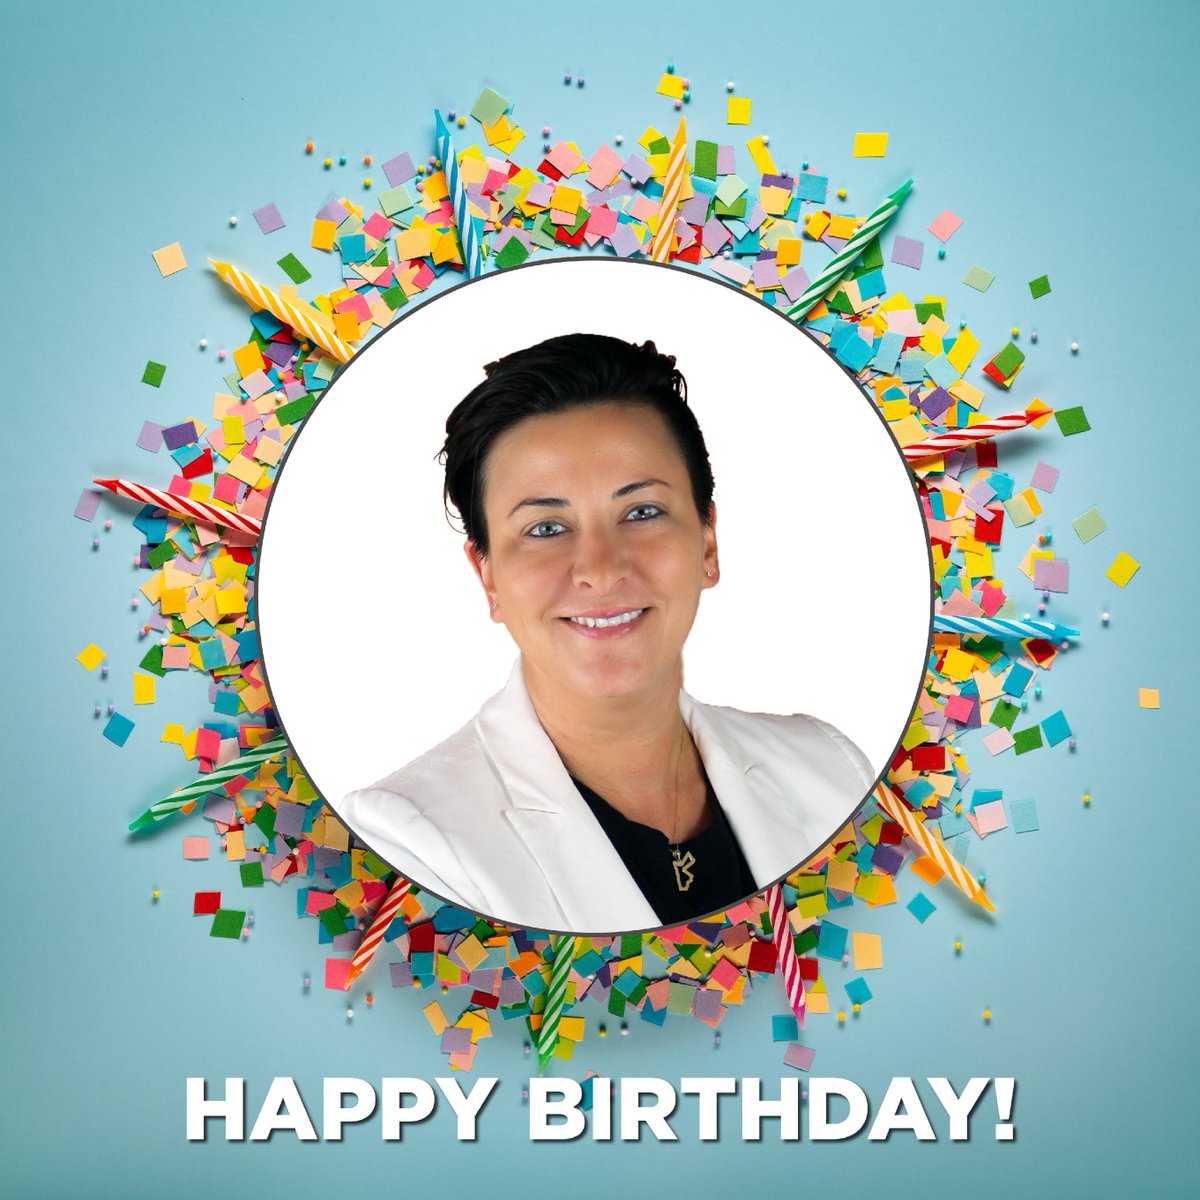 Birthday alert!🚨 Happy birthday to one of incept's creative masterminds, Tamara Bdour. We hope your day is full of great food, time with family and friends, and a Wordle win! Have a great birthday! 🎉